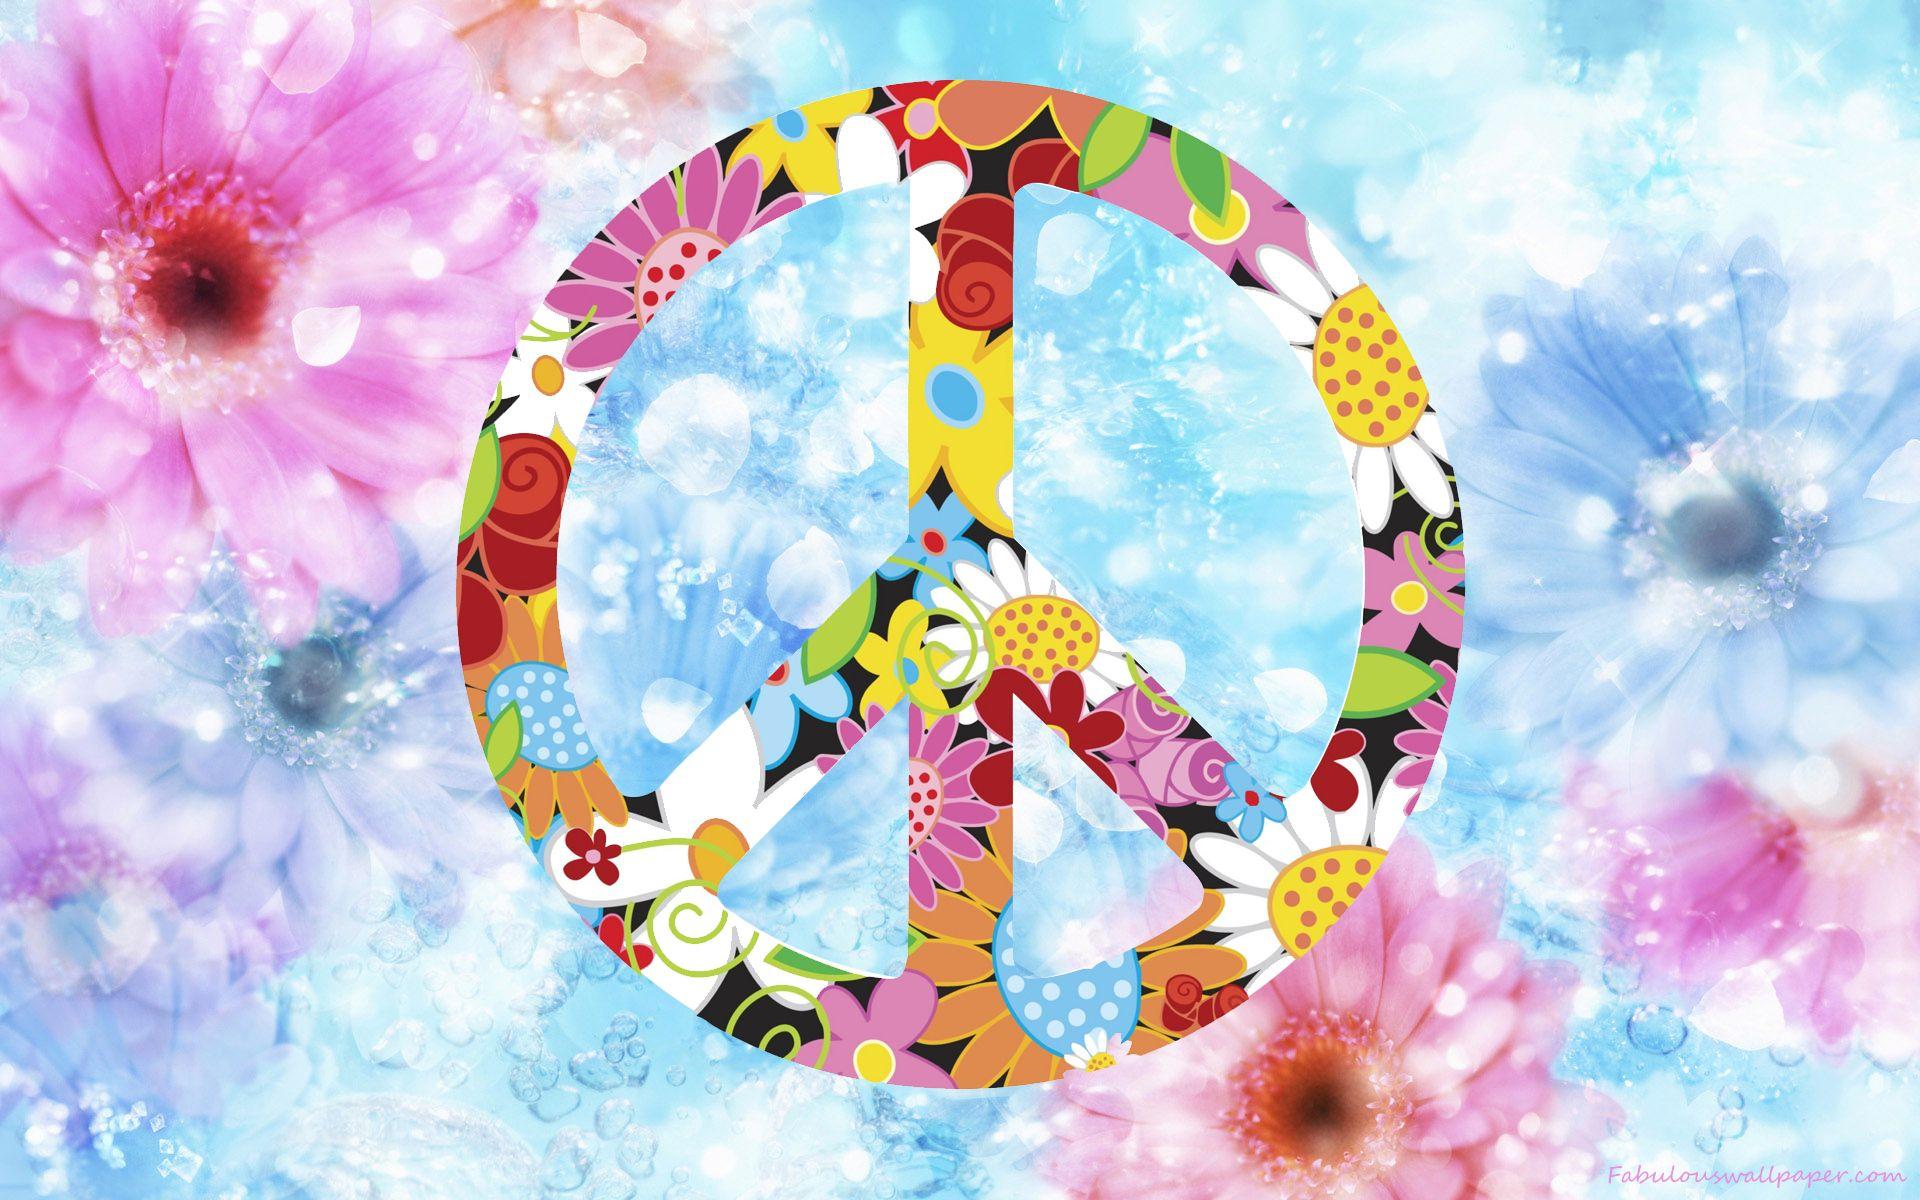 Peace and Love Wallpapers - Top Free Peace and Love Backgrounds ...